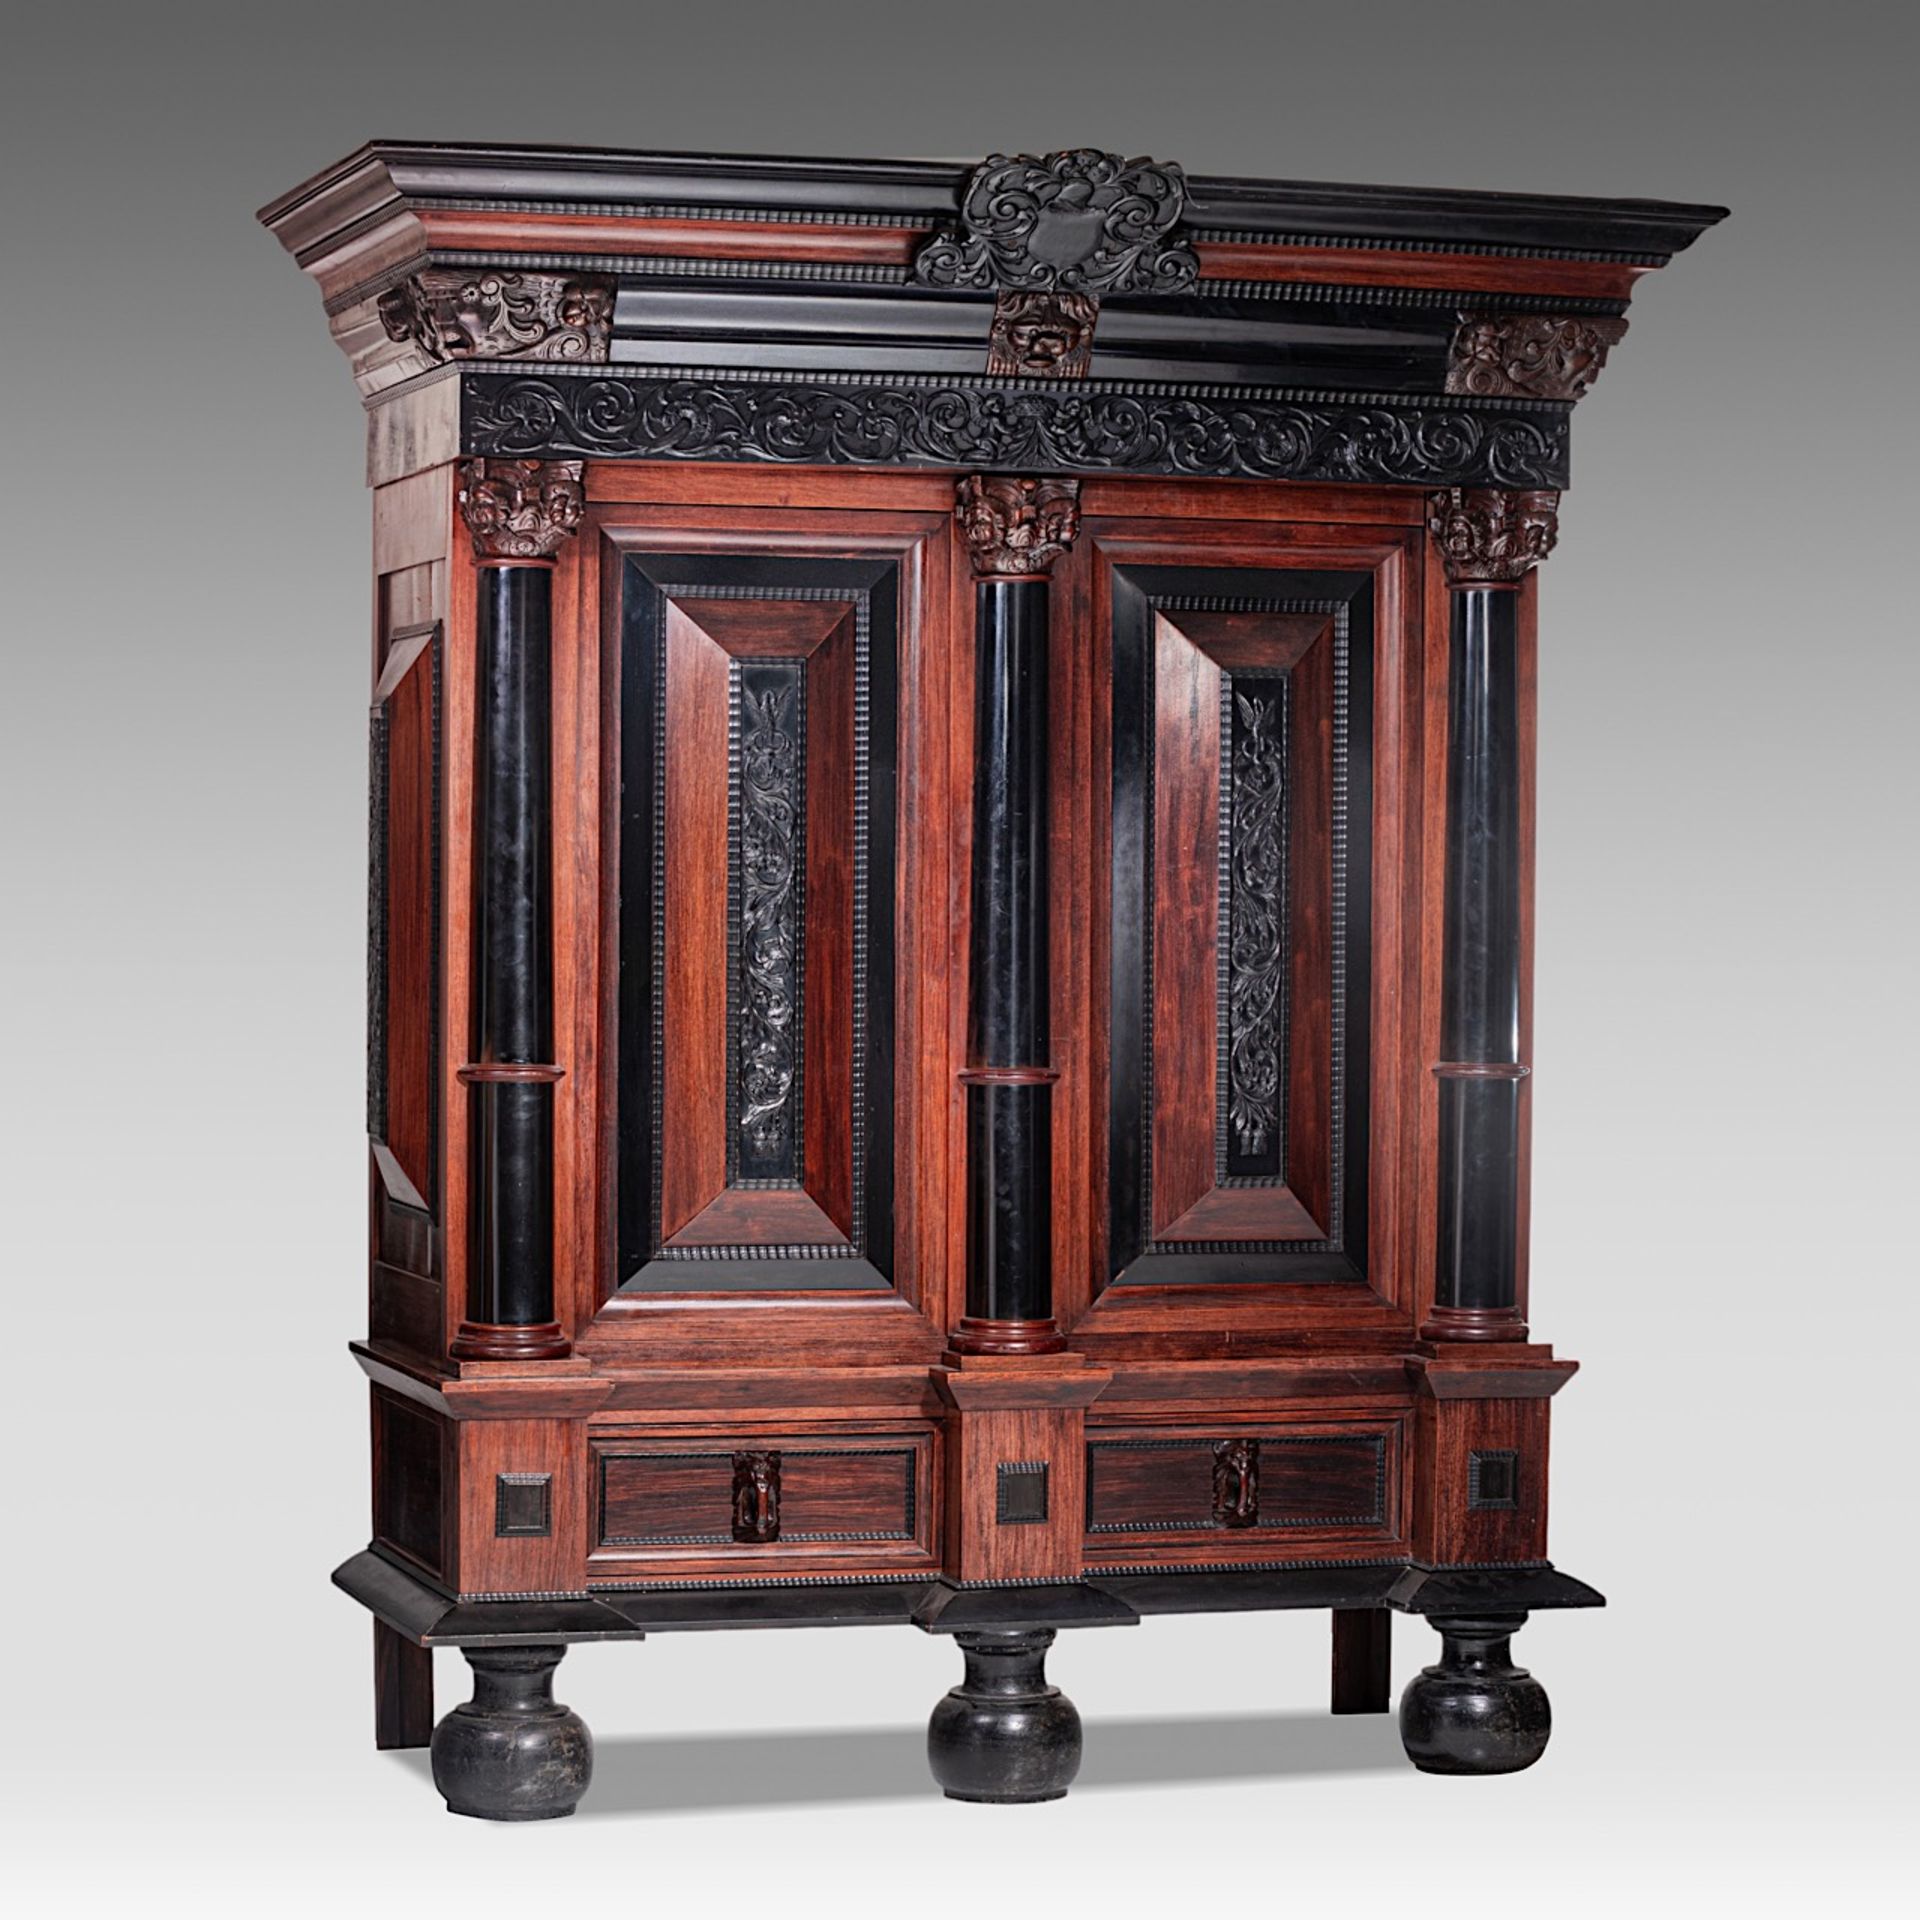 A large Baroque style rosewood and ebony cupboard, H 235 - W 200 - D 85 cm - Bild 2 aus 6